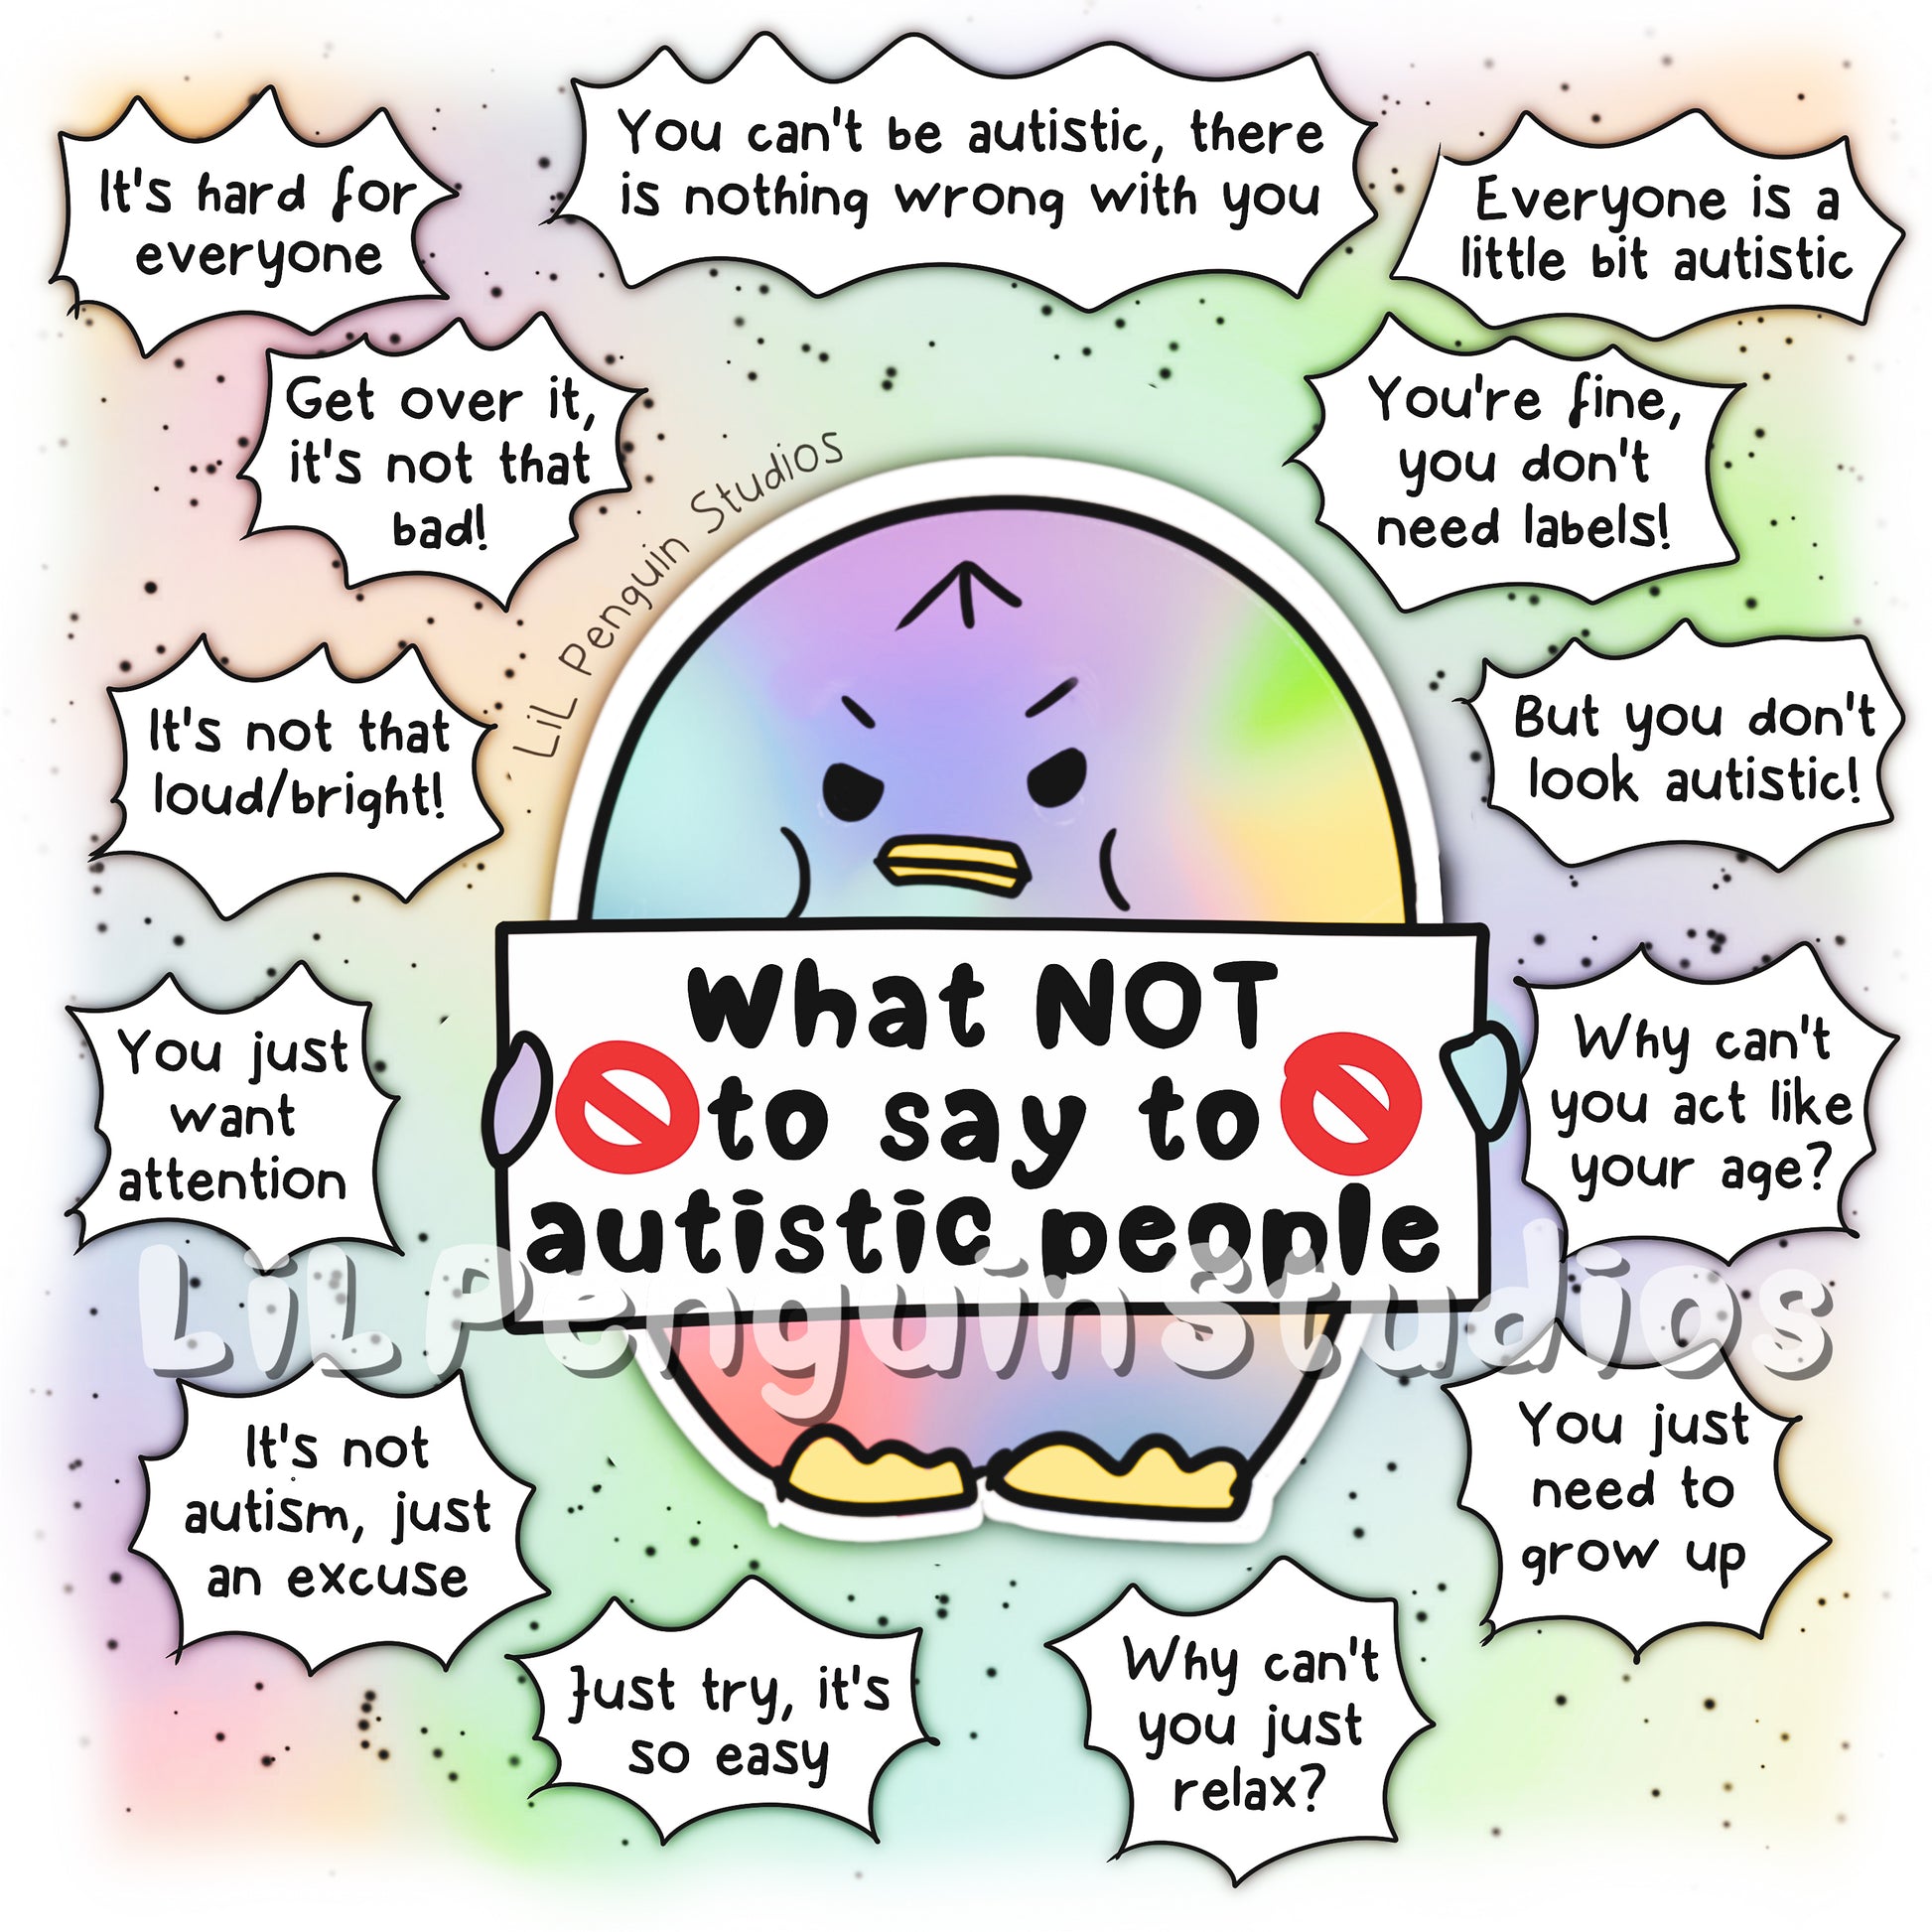 Transcript (kind of): 🚫You can't be autistic, there is nothing wrong with you 🚫Everyone is a little bit autistic 🚫You're fine, you don't need such labels 🚫But you don't look autistic 🚫Why can't you act like your age? 🚫Why can't you just relax? 🚫You just need to grow up! 🚫Just try harder, it's so easy 🚫It's not autism, just an excuse 🚫You just want attention 🚫It's not that loud/bright! 🚫Get over it, it's not that bad! 🚫It's hard for everyone